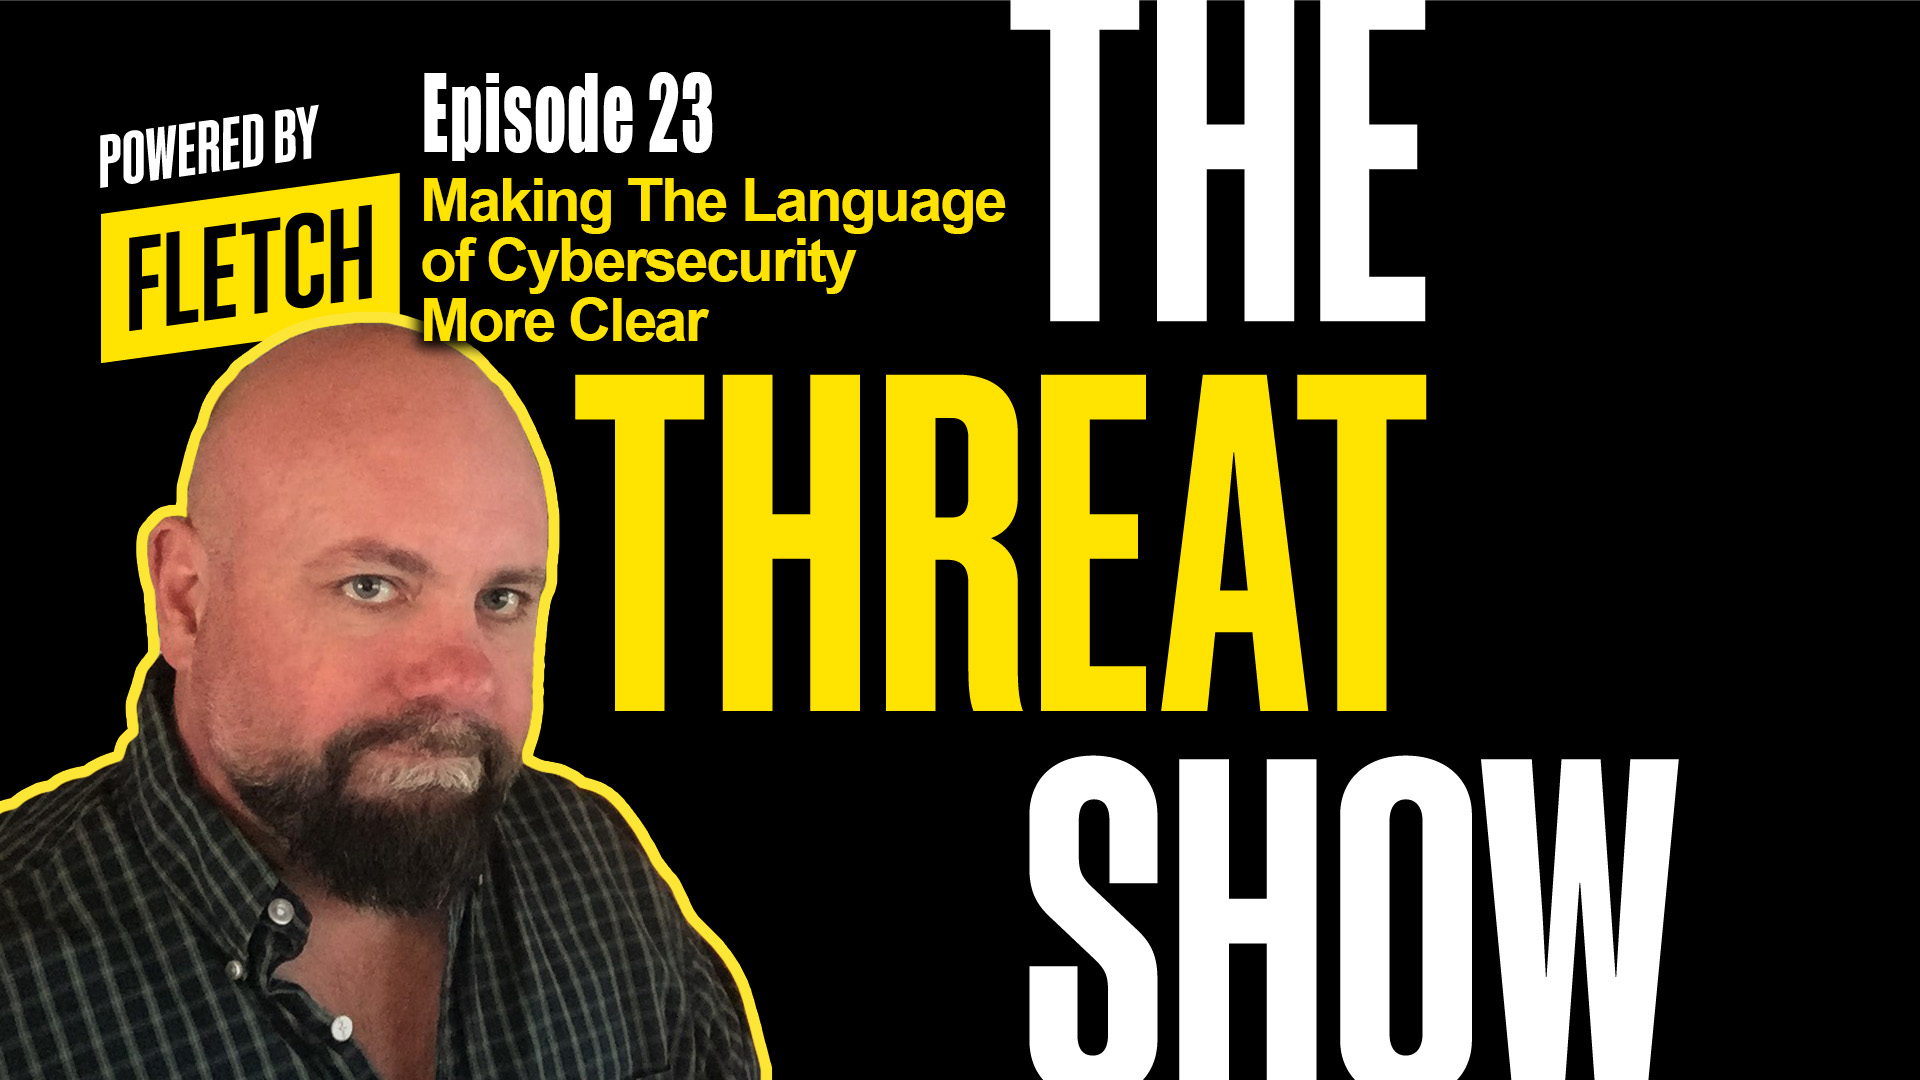 The Threat Show Ep. 23